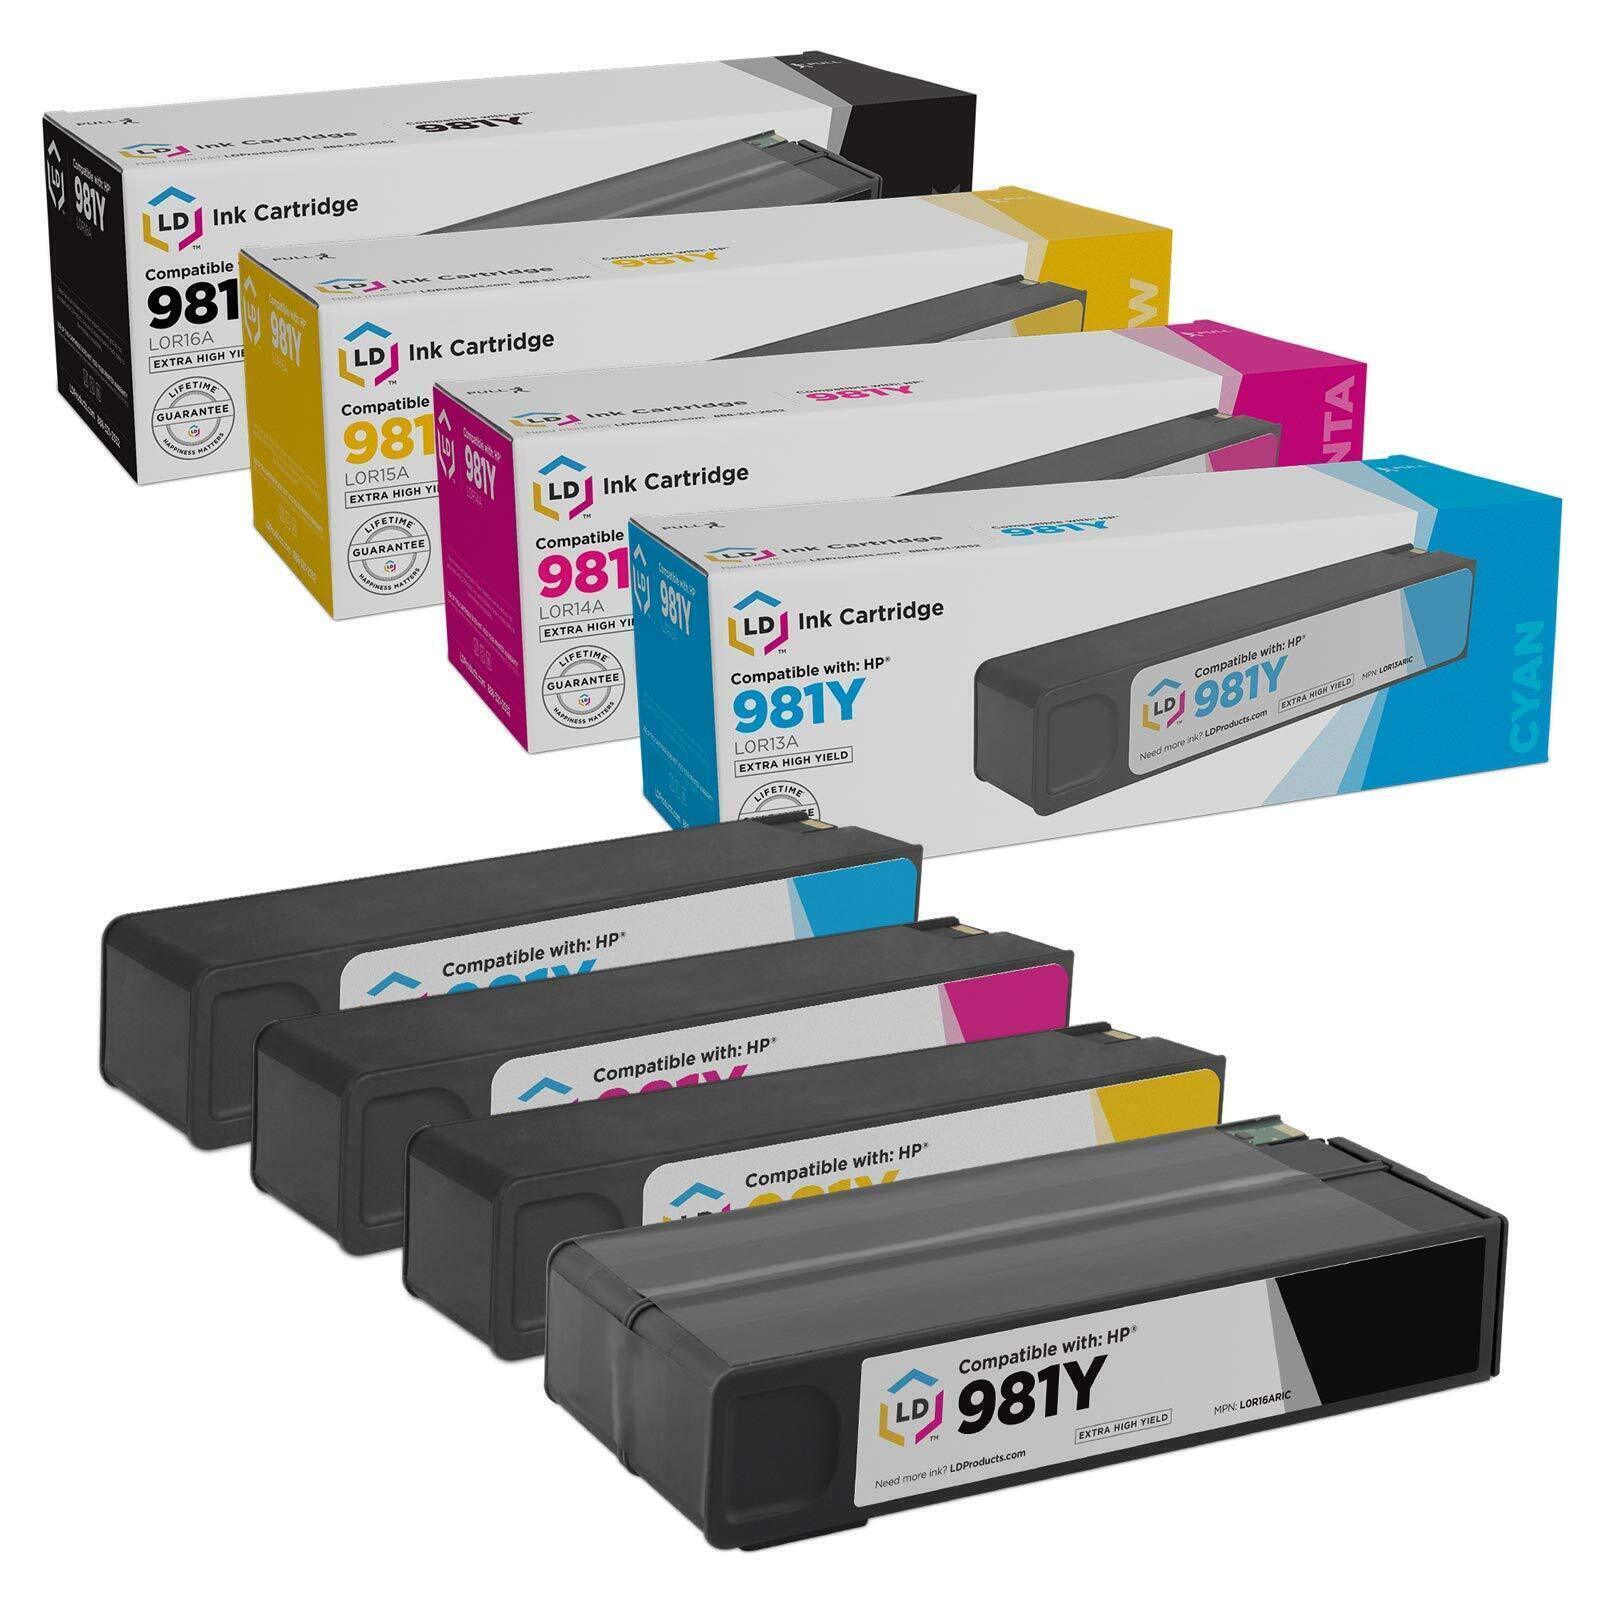 LD Reman Fits for HP 981Y Set of 4 Ink Cartridges: Black Cyan Magenta Yellow